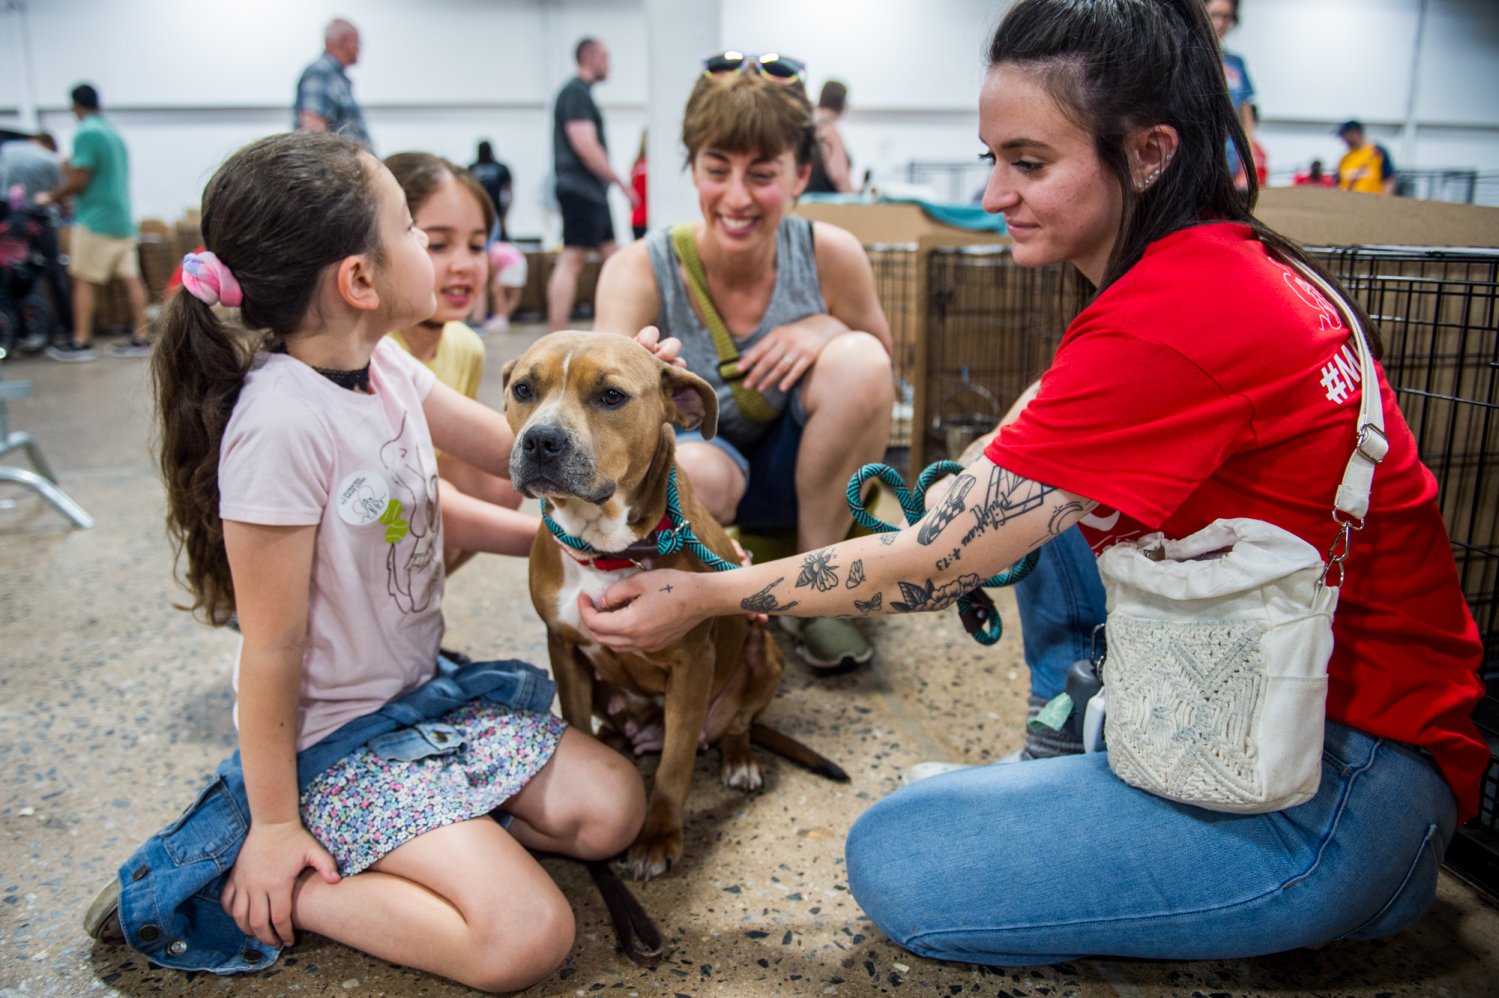 1469 pets adopted at Brandywine Valley SPCA’s mega adoption event